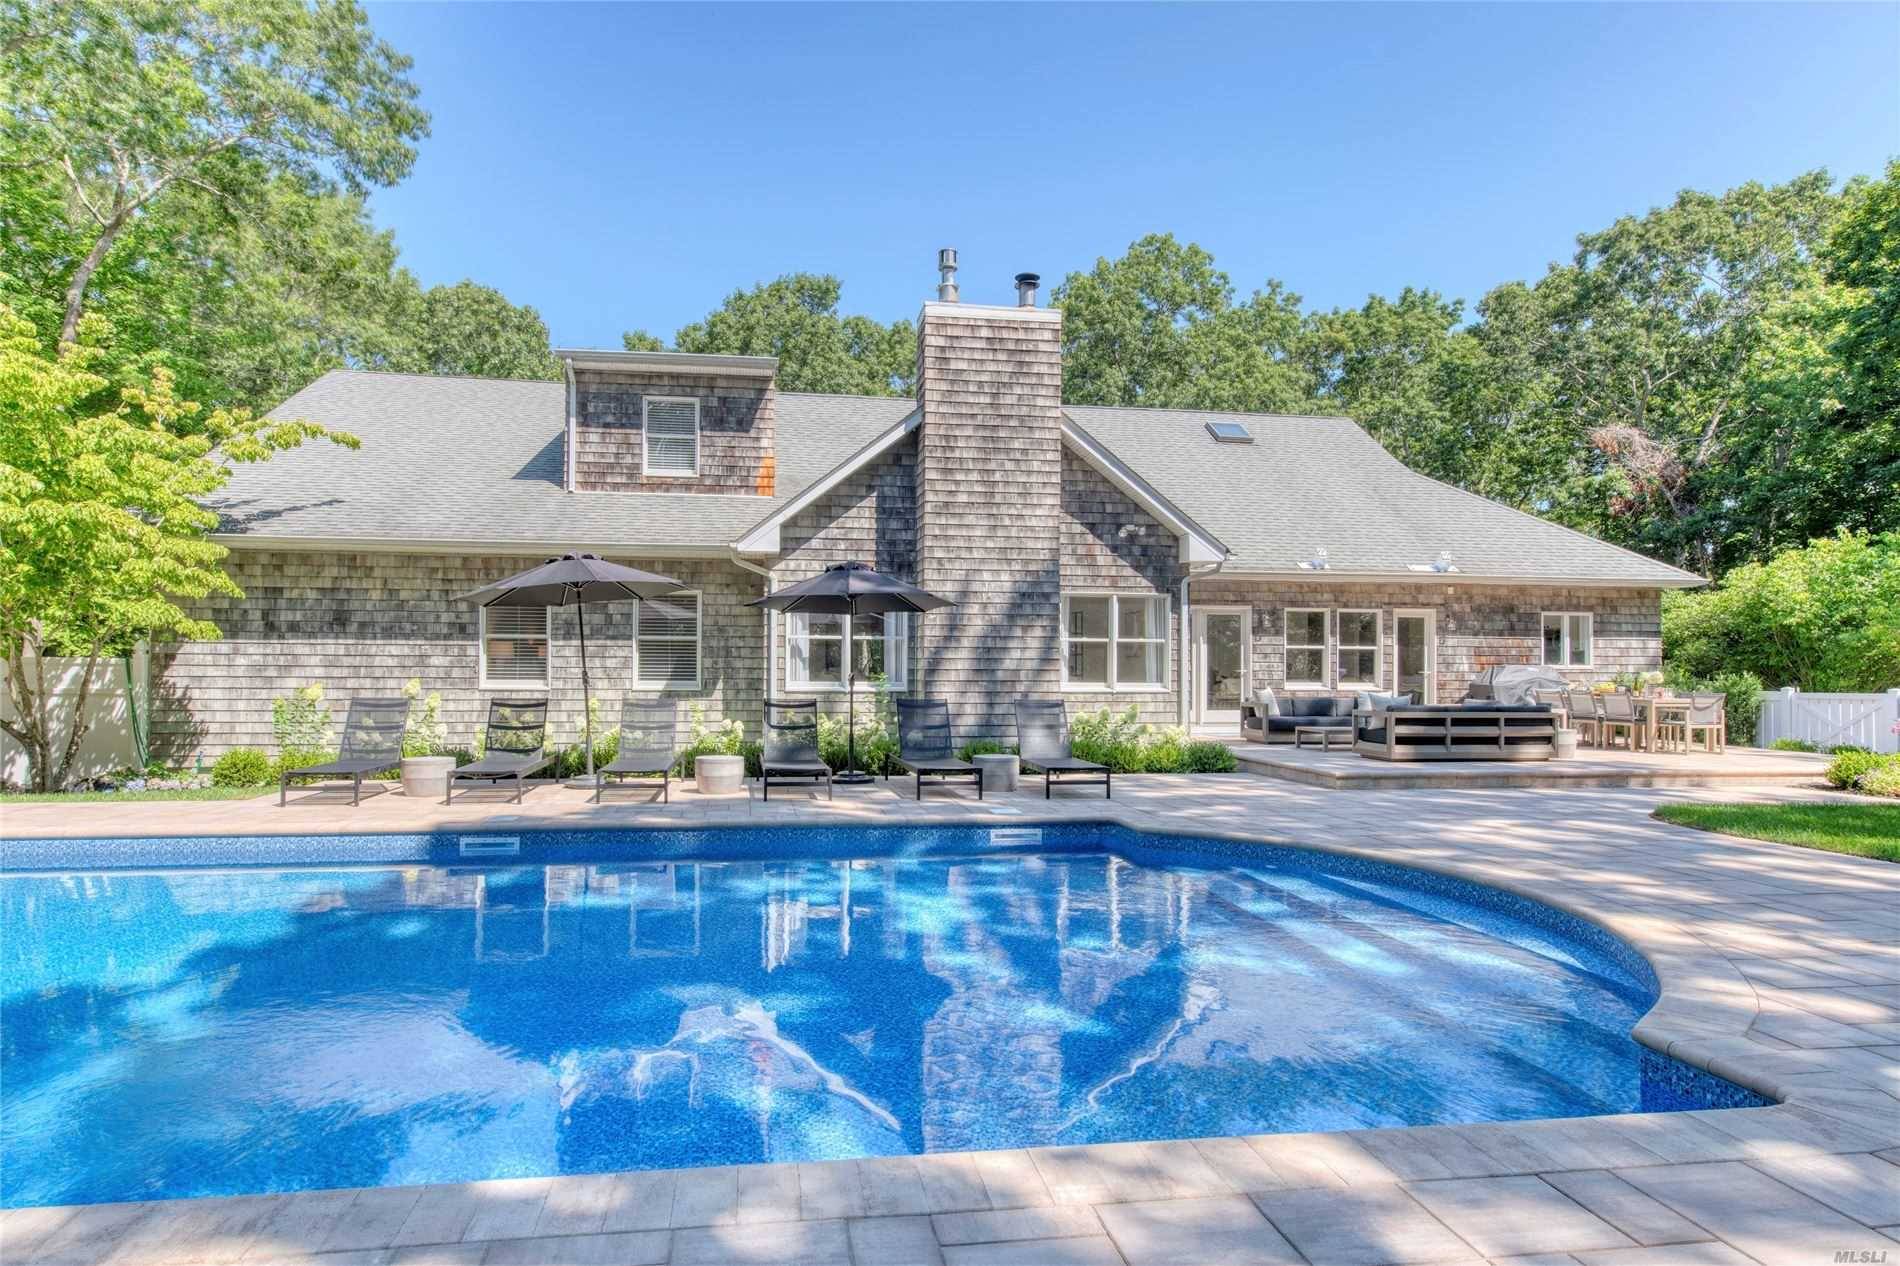 This is the full package recently renovated with 7328 square feet on over an acre of land and six en suite bedrooms with multiple living spaces on three levels.